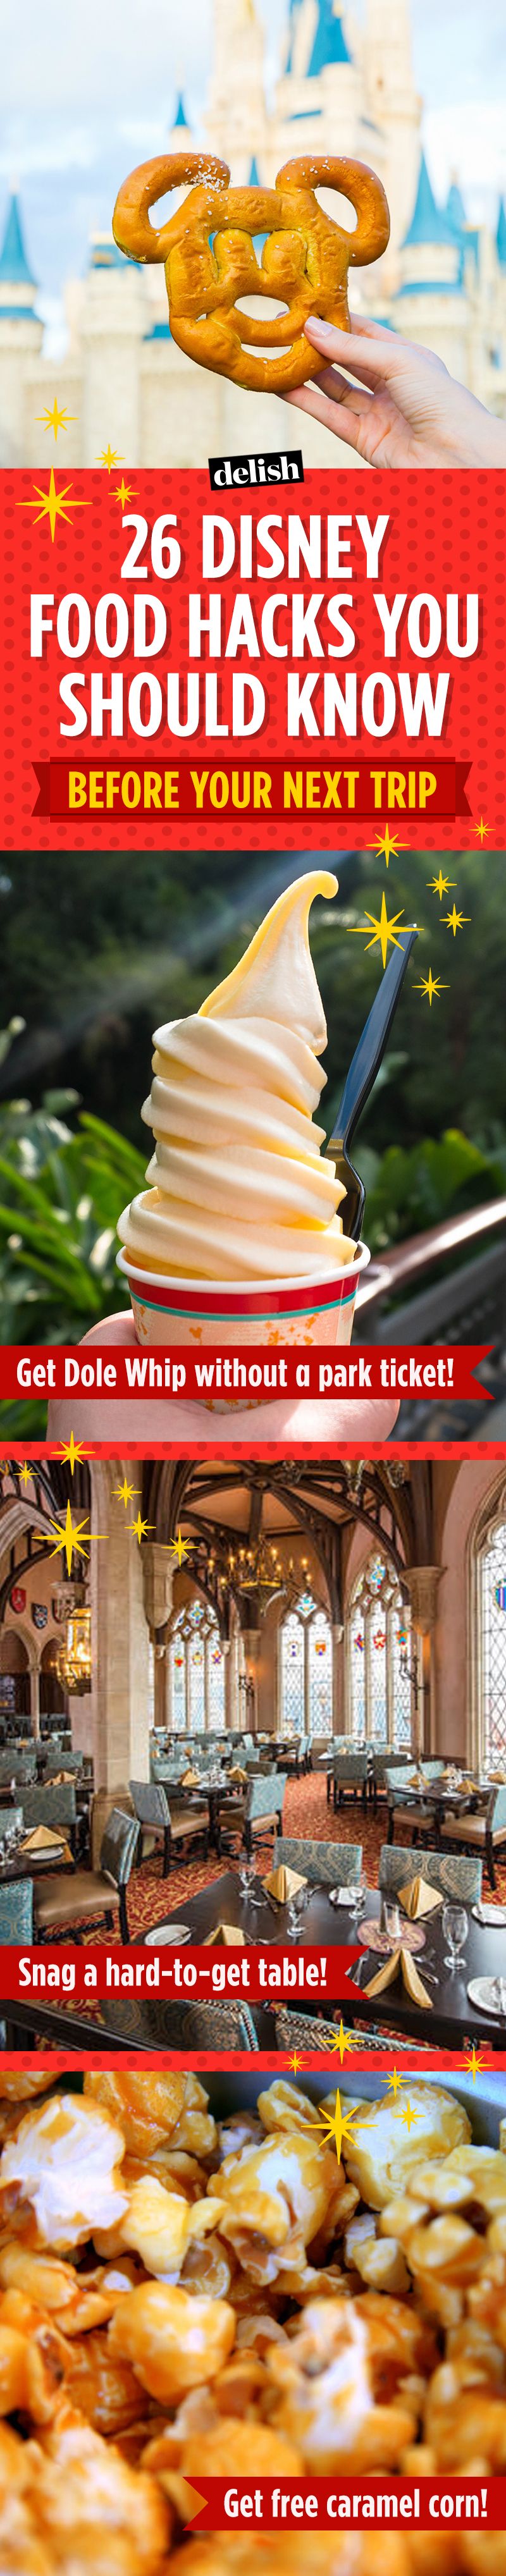 I love a Disneyland food hack and this one works great with alcohl